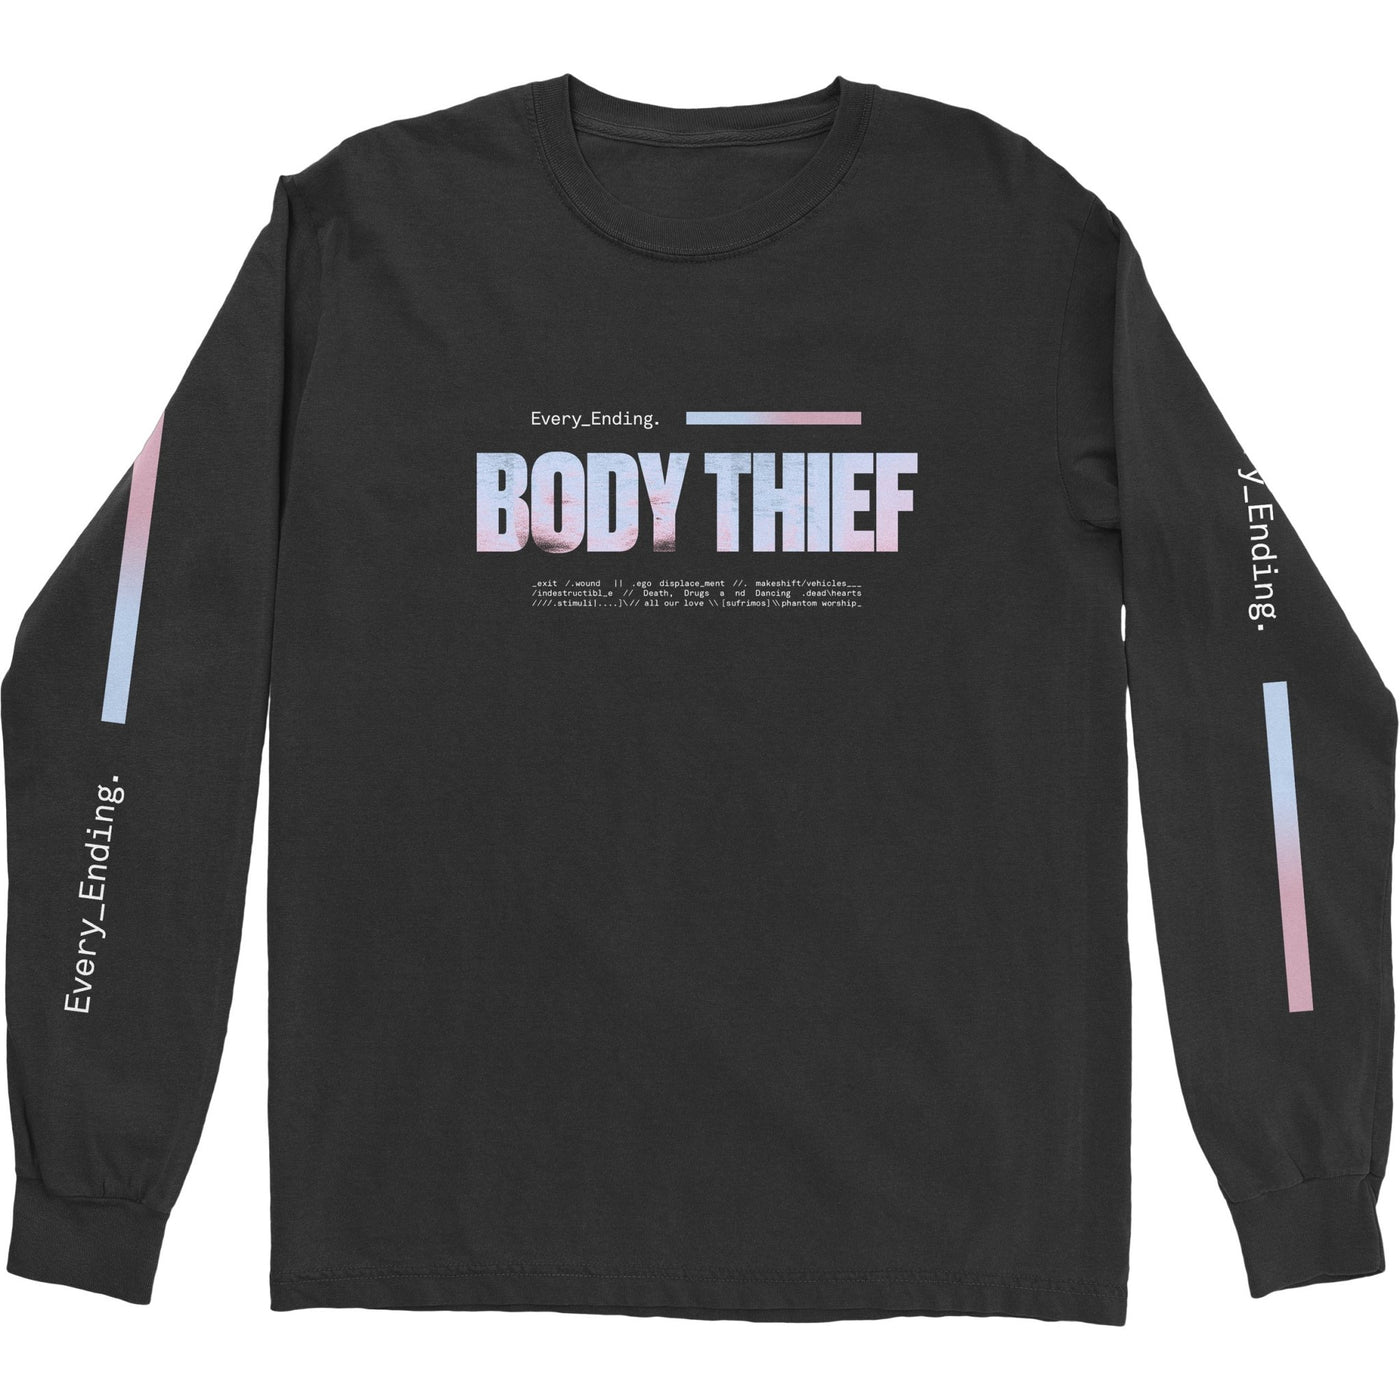 black long sleeve with every ending text on both sleeves in white. long block after text in light blue and pink. body thief in large text across the chest in light blue and pink. every ending text smaller above that, and text of tracklist in coding type font under large text. 